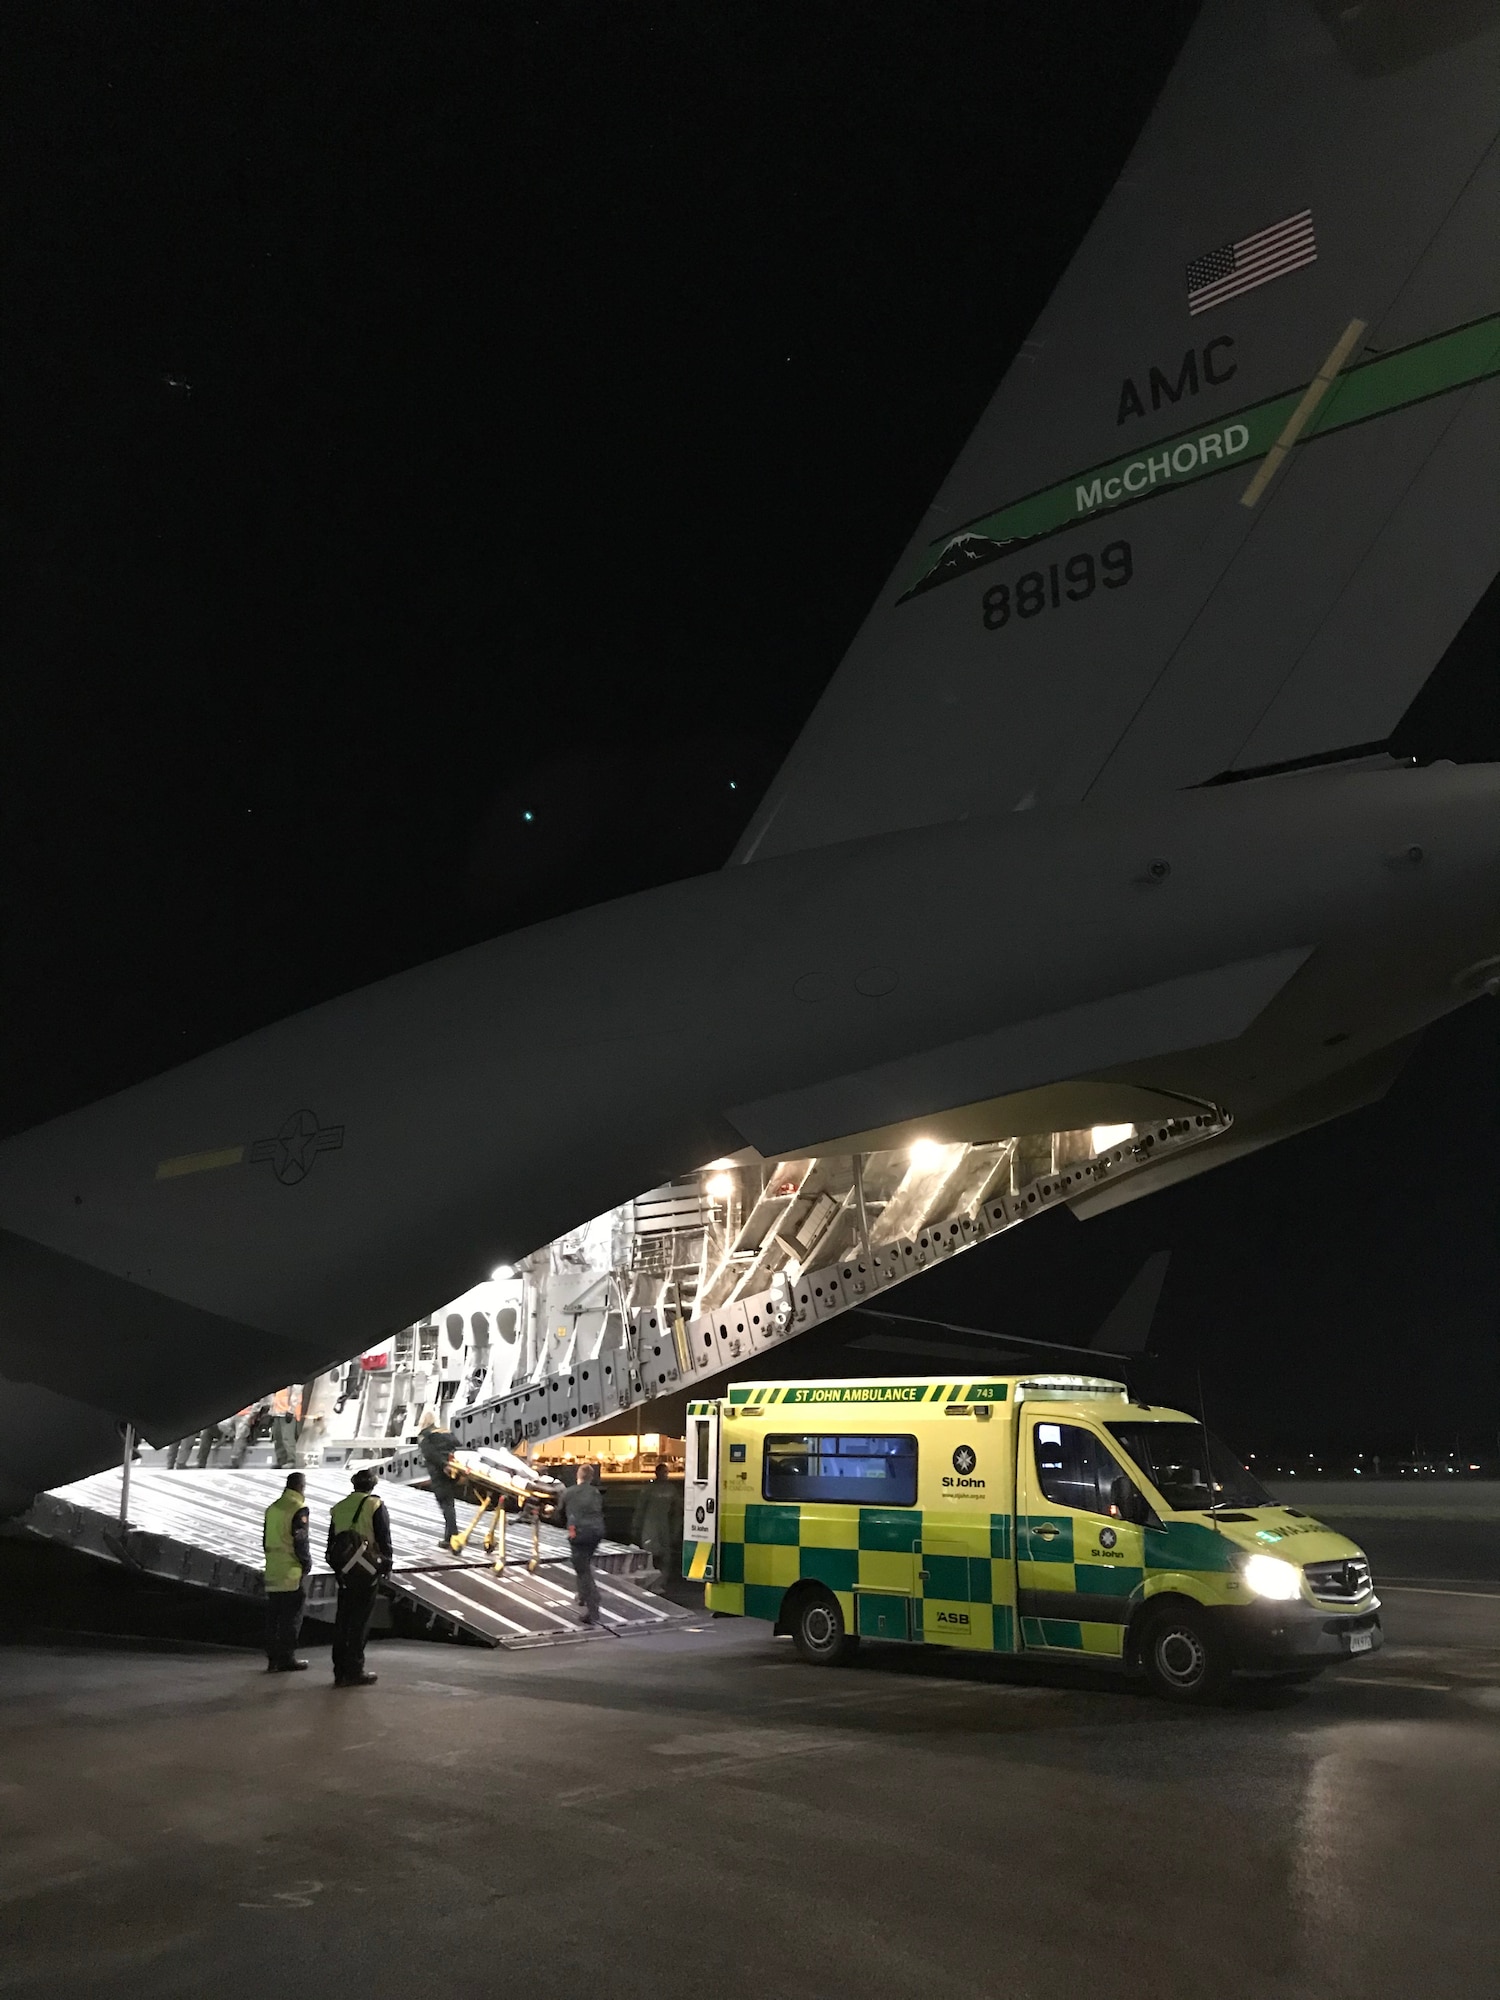 A Christchurch New Zealand Life Fleet medical team loads response equipment onto the C-17 Globemaster III for an emergency MEDEVAC from the National Science Foundation’s McMurdo Station in the Antarctic Aug. 25. (Courtesy photo)